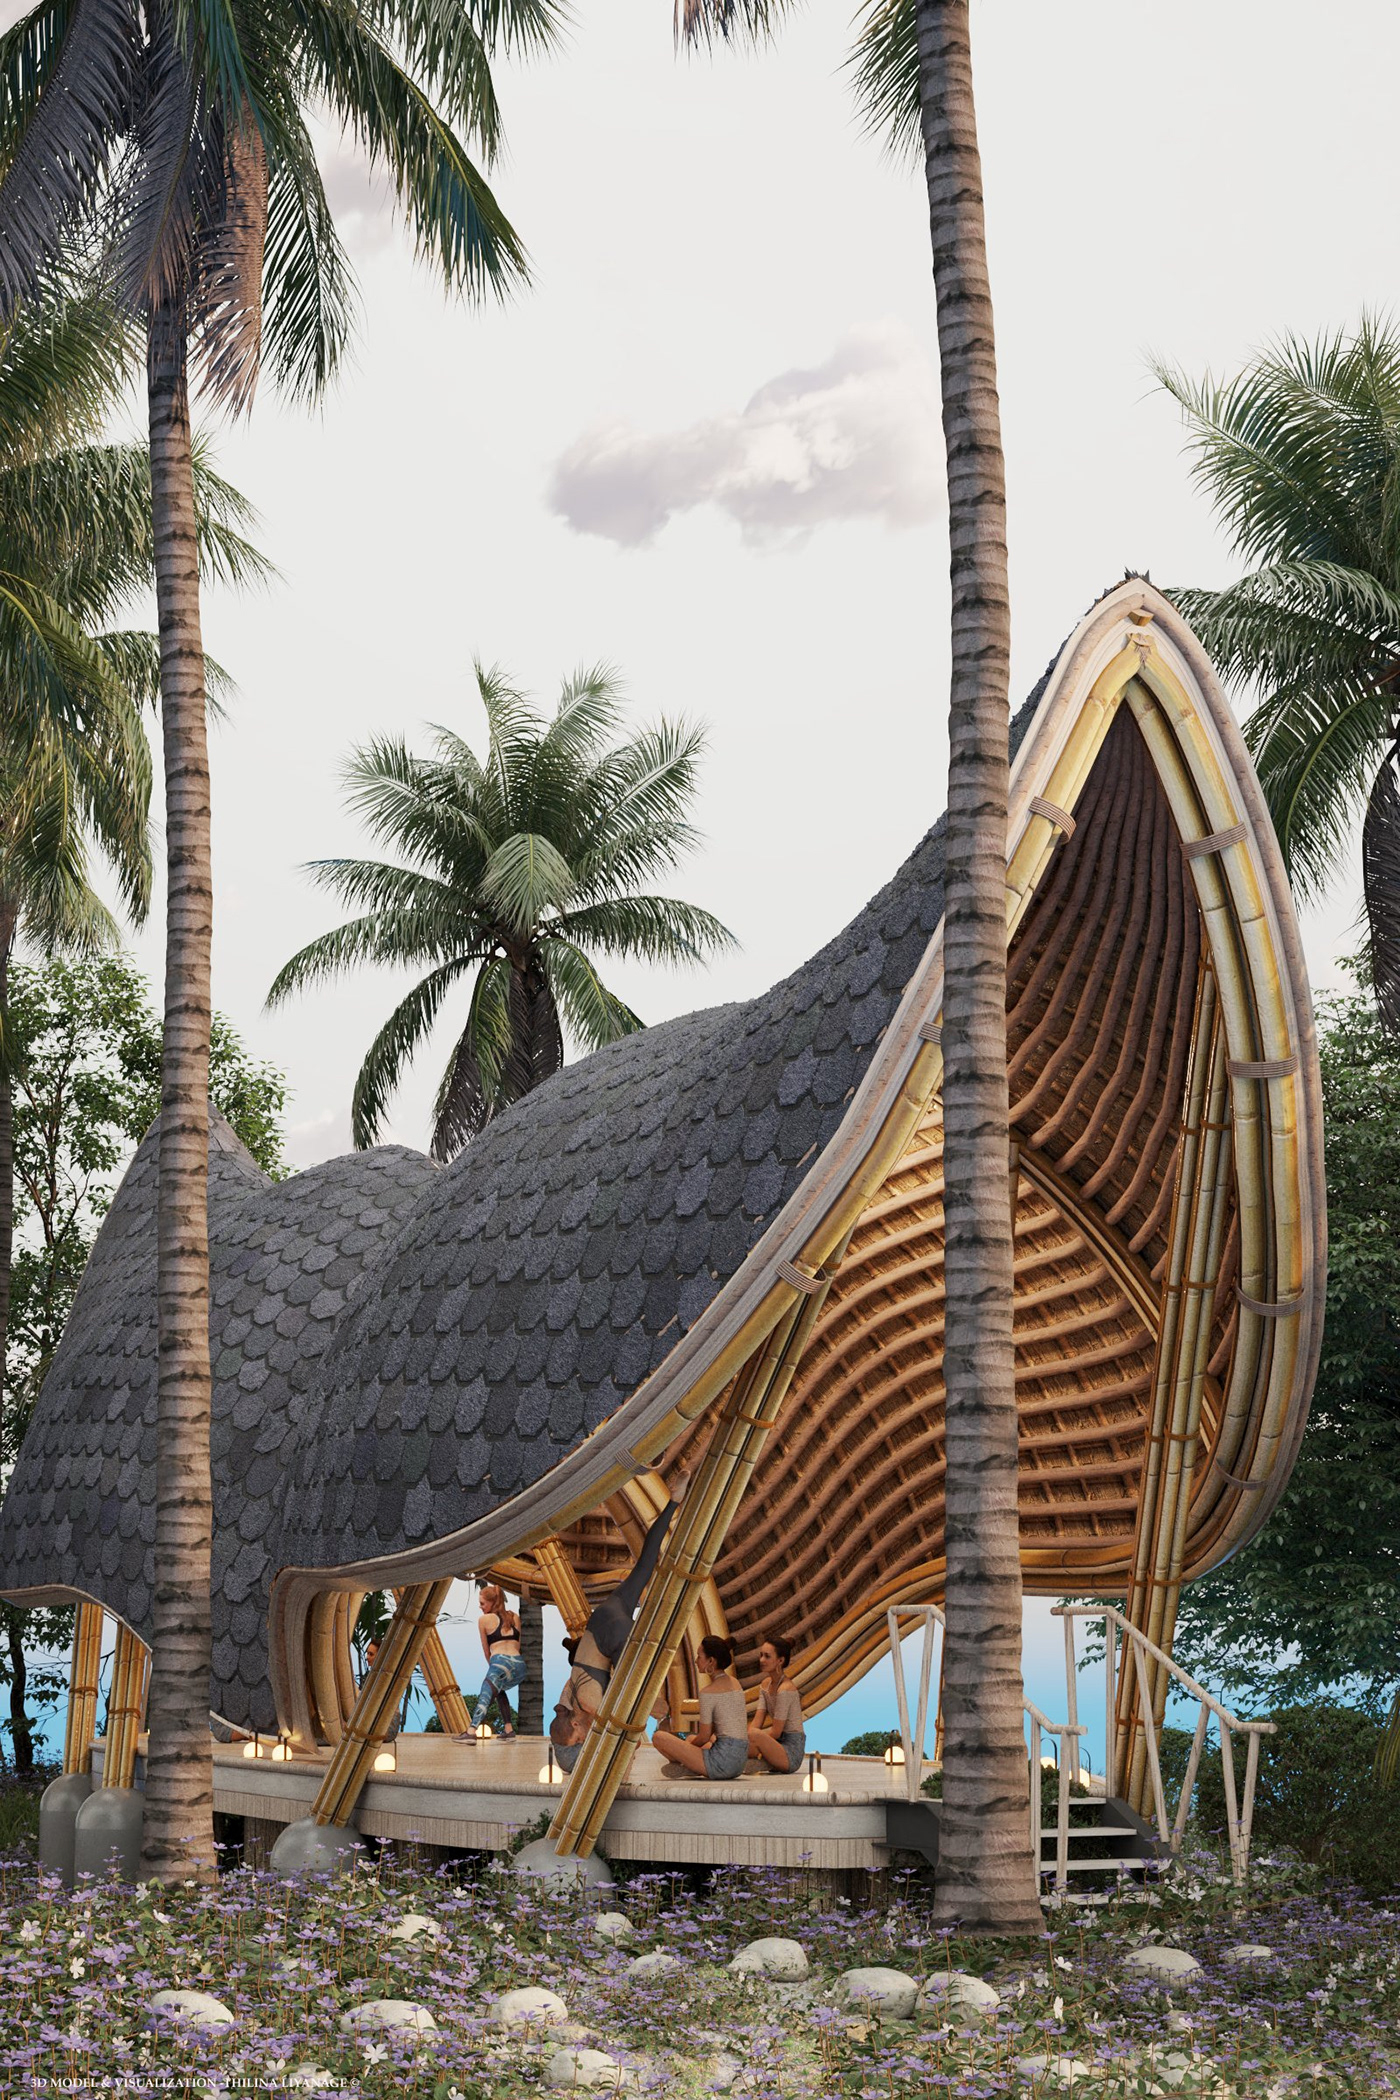 architecture conceptual design bamboo bamboo architecture architectural design visualization exterior 3d modeling architectural concept thilina liyanage